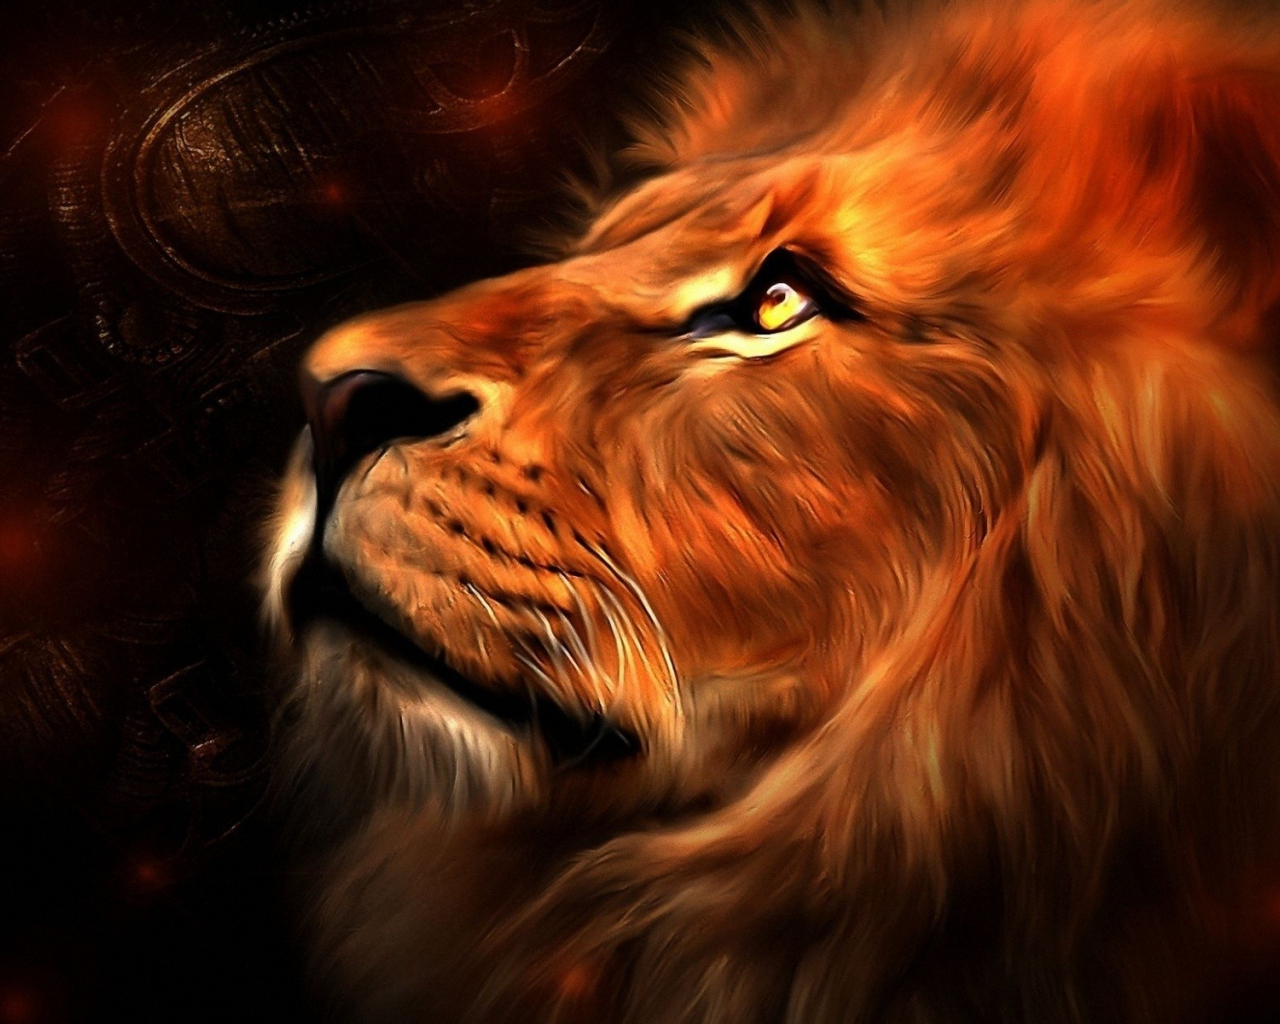 Free download Dangerous Lions HD Wallpaper Picture Image Background 1920x1200 [1920x1200] for your Desktop, Mobile & Tablet. Explore Lions Background. Lions Wallpaper, Lions Wallpaper, White Lions Wallpaper